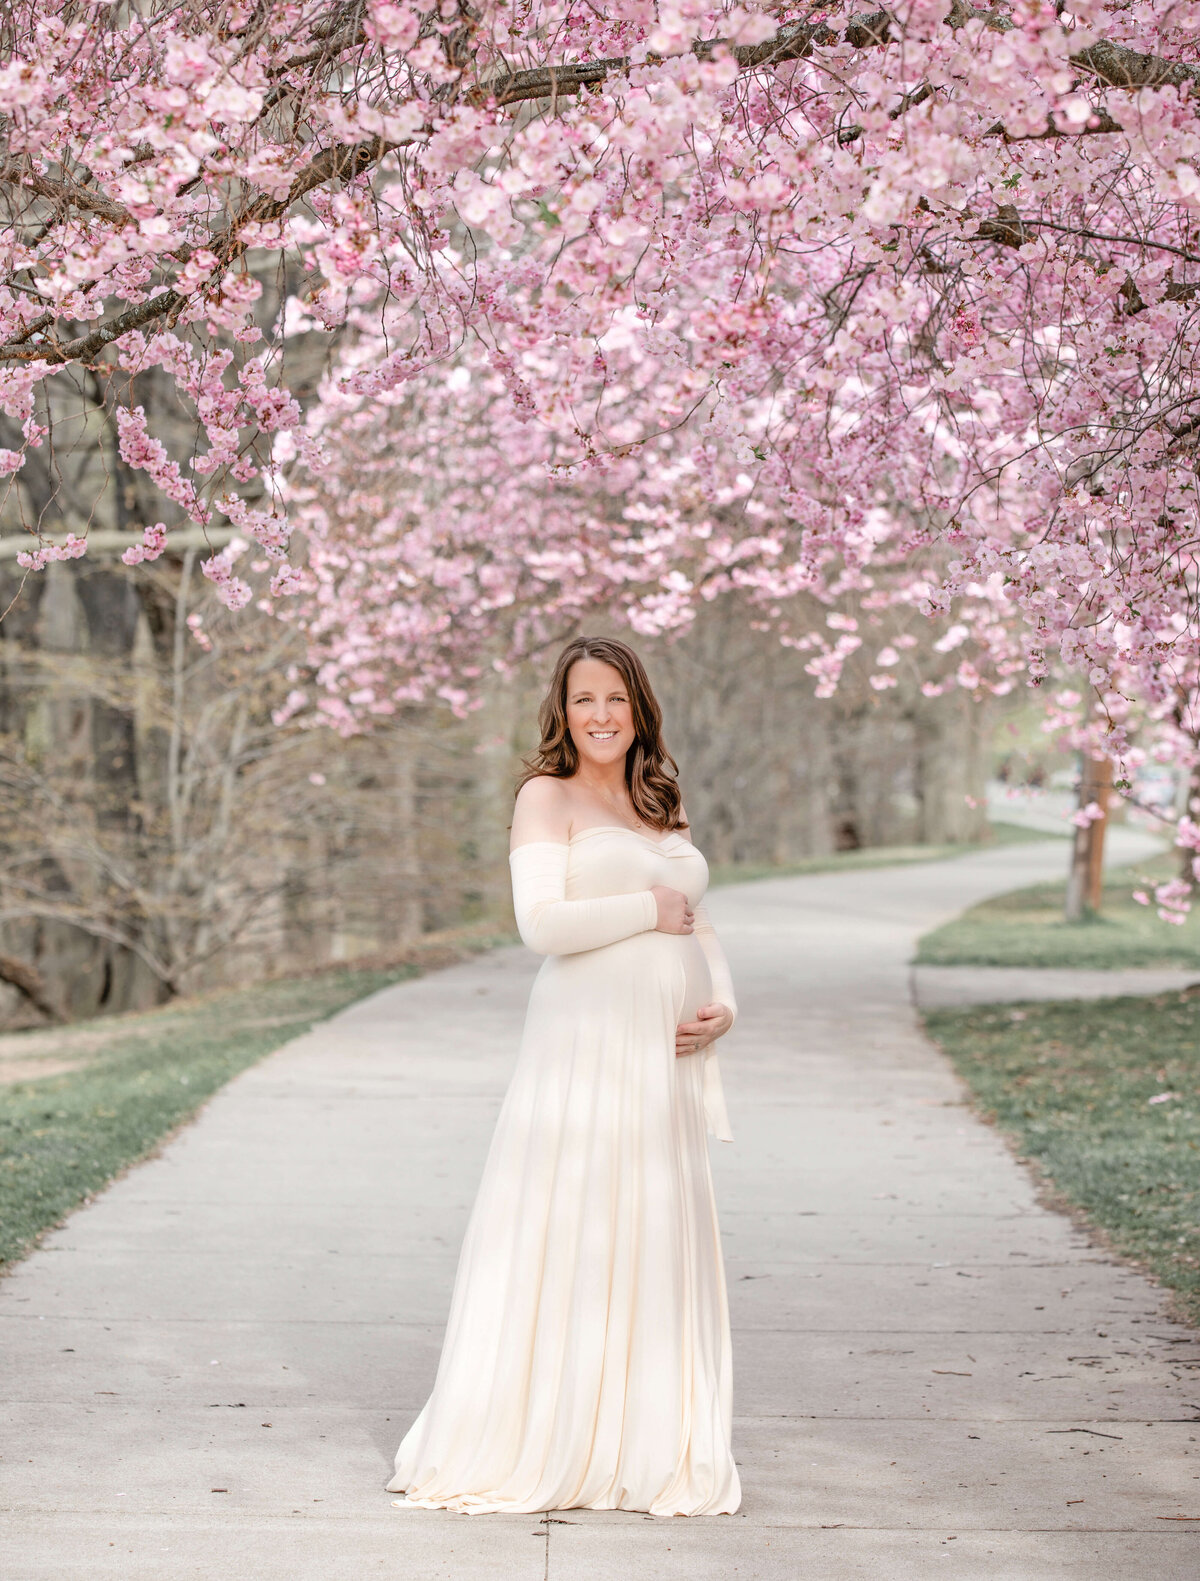 A young pregnant woman posing in front of beautiful cherry blossoms in Rochester NY